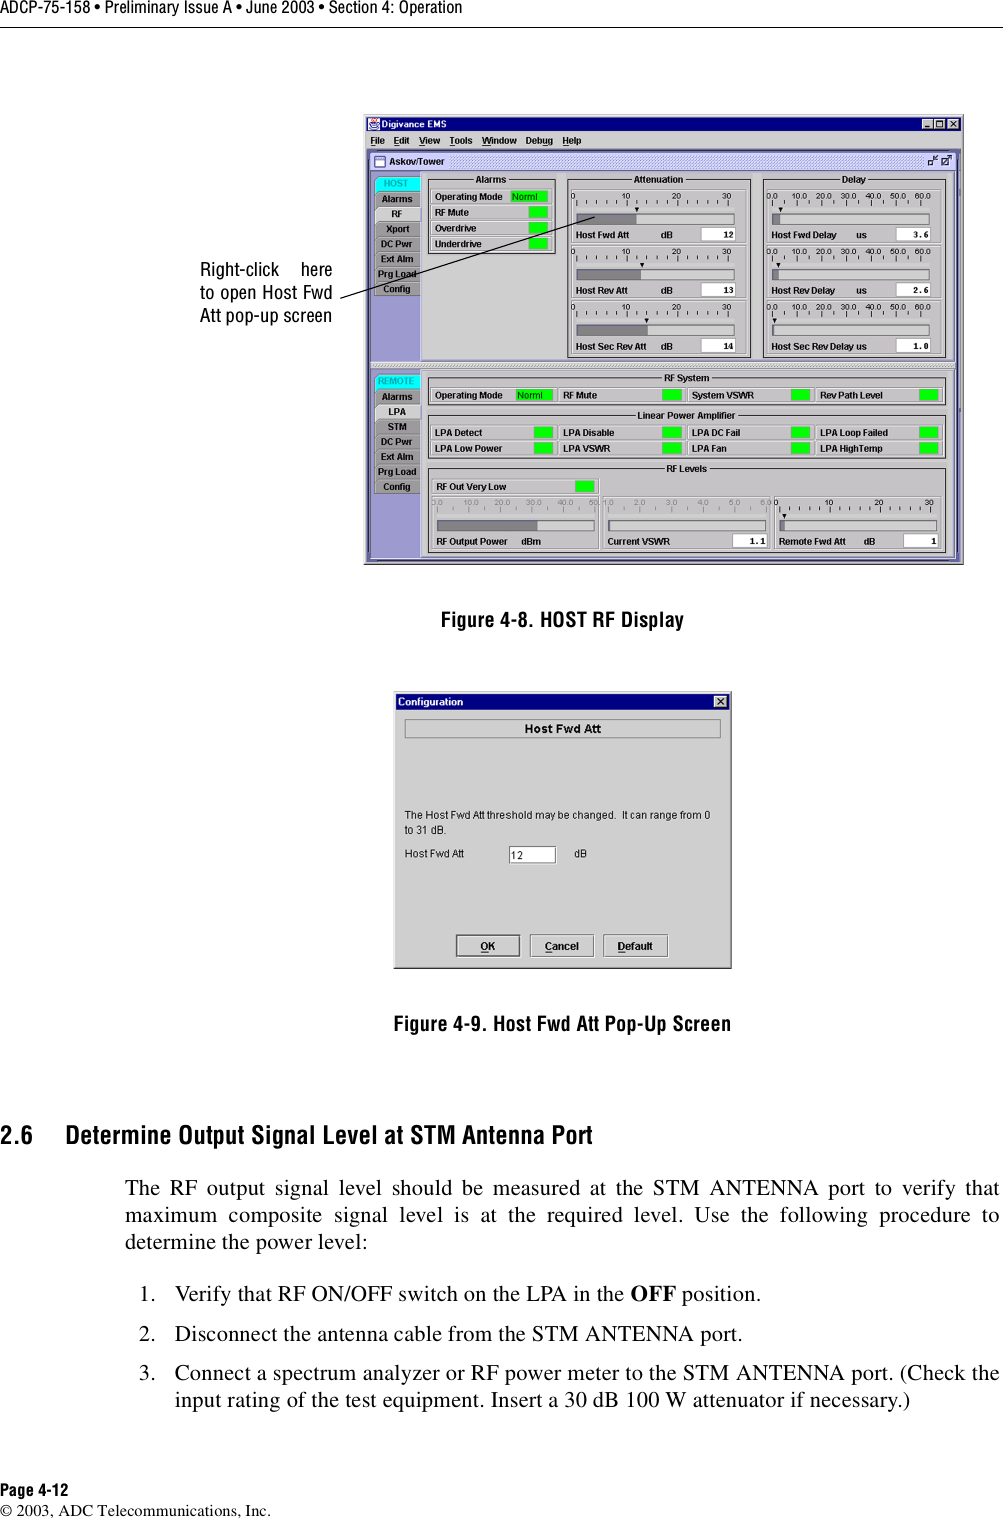 ADCP-75-158 • Preliminary Issue A • June 2003 • Section 4: OperationPage 4-12© 2003, ADC Telecommunications, Inc.Figure 4-8. HOST RF DisplayFigure 4-9. Host Fwd Att Pop-Up Screen2.6 Determine Output Signal Level at STM Antenna PortThe RF output signal level should be measured at the STM ANTENNA port to verify thatmaximum composite signal level is at the required level. Use the following procedure todetermine the power level:1. Verify that RF ON/OFF switch on the LPA in the OFF position. 2. Disconnect the antenna cable from the STM ANTENNA port. 3. Connect a spectrum analyzer or RF power meter to the STM ANTENNA port. (Check theinput rating of the test equipment. Insert a 30 dB 100 W attenuator if necessary.) Right-click hereto open Host FwdAtt pop-up screen